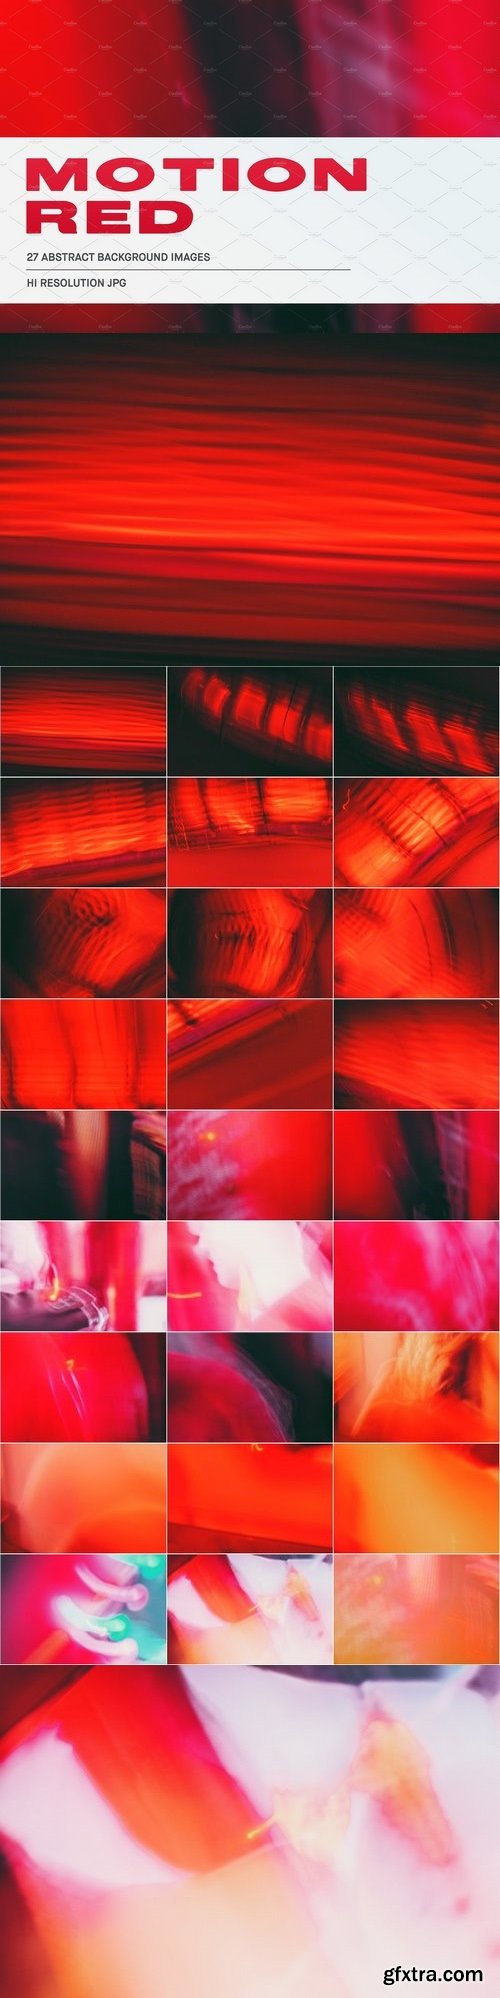 CM - Motion Red Abstract Bundle 900973